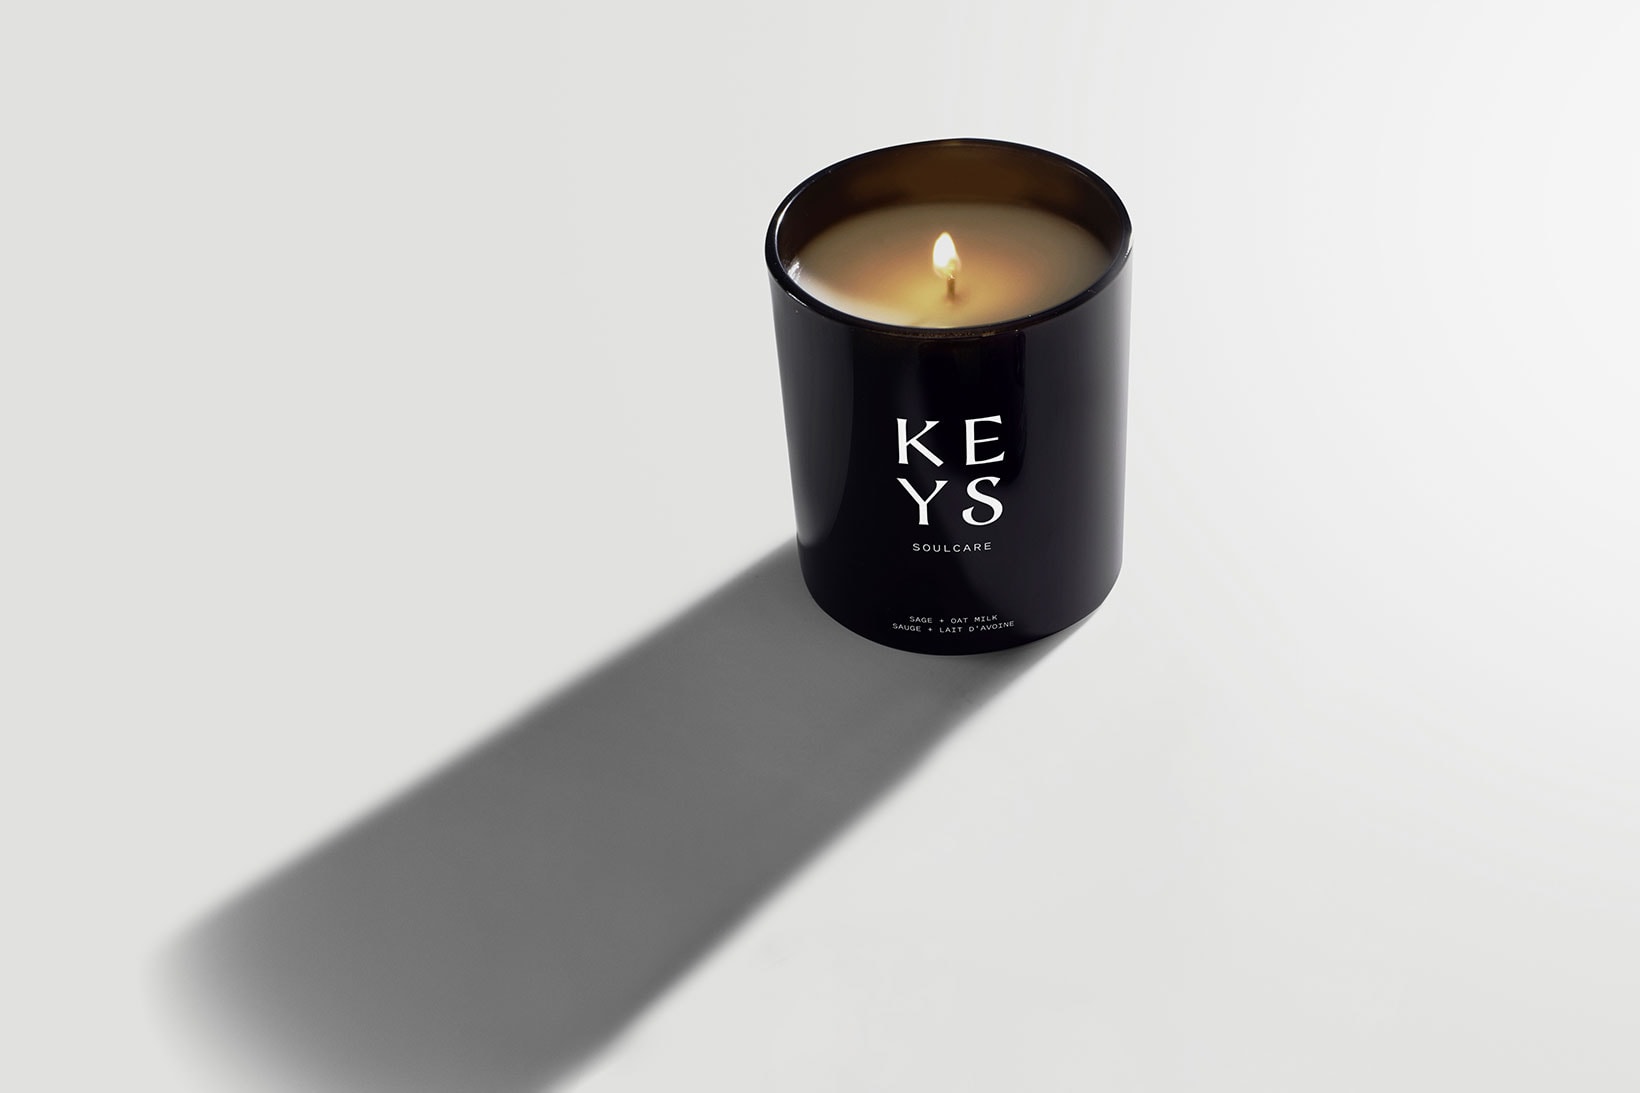 alicia keys soulcare skincare full collection sage oat milk candle home scents